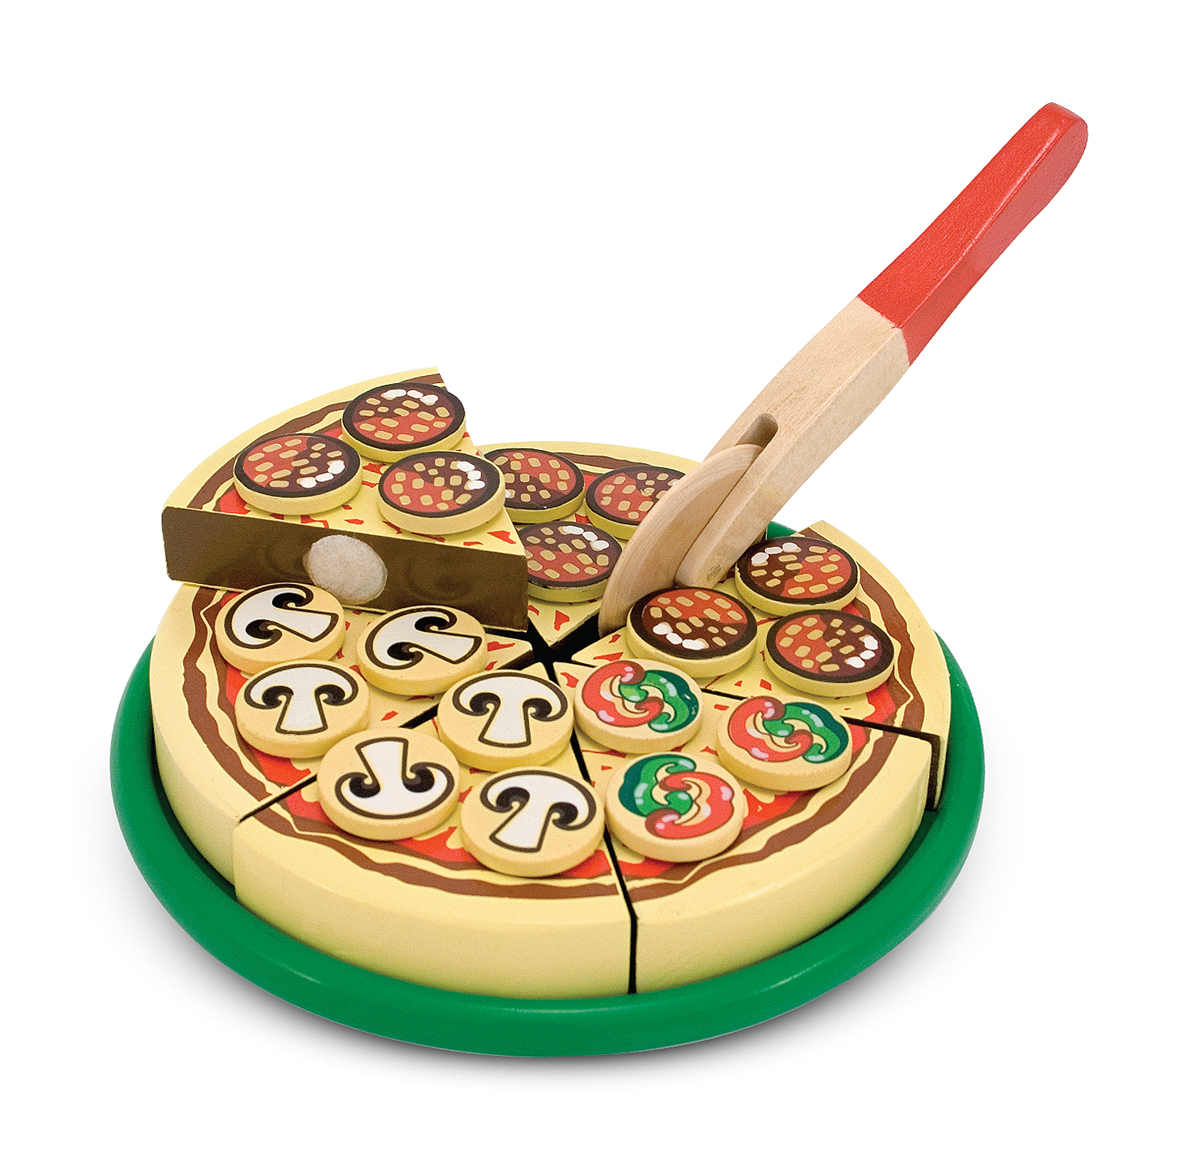 Melissa and Doug Wooden Pizza